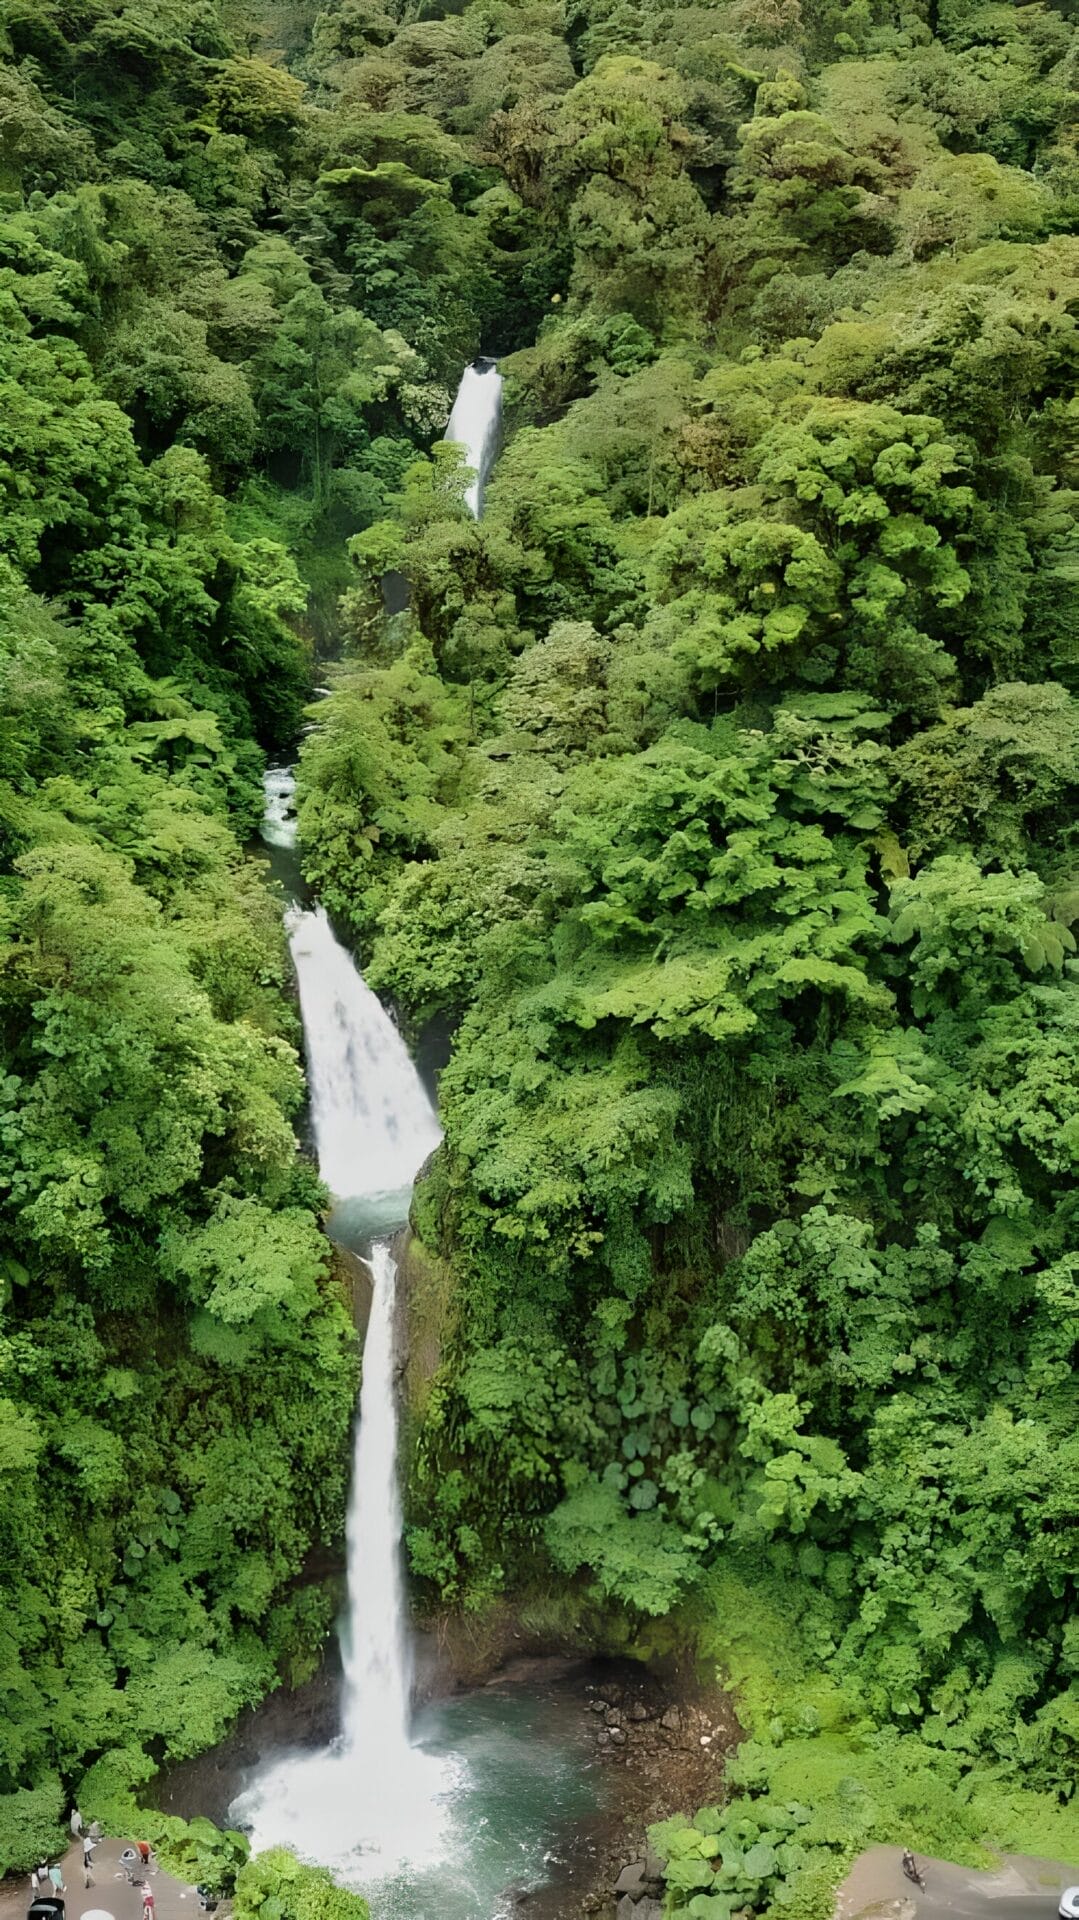 drone image of waterfalls and jungles in Costa Rica